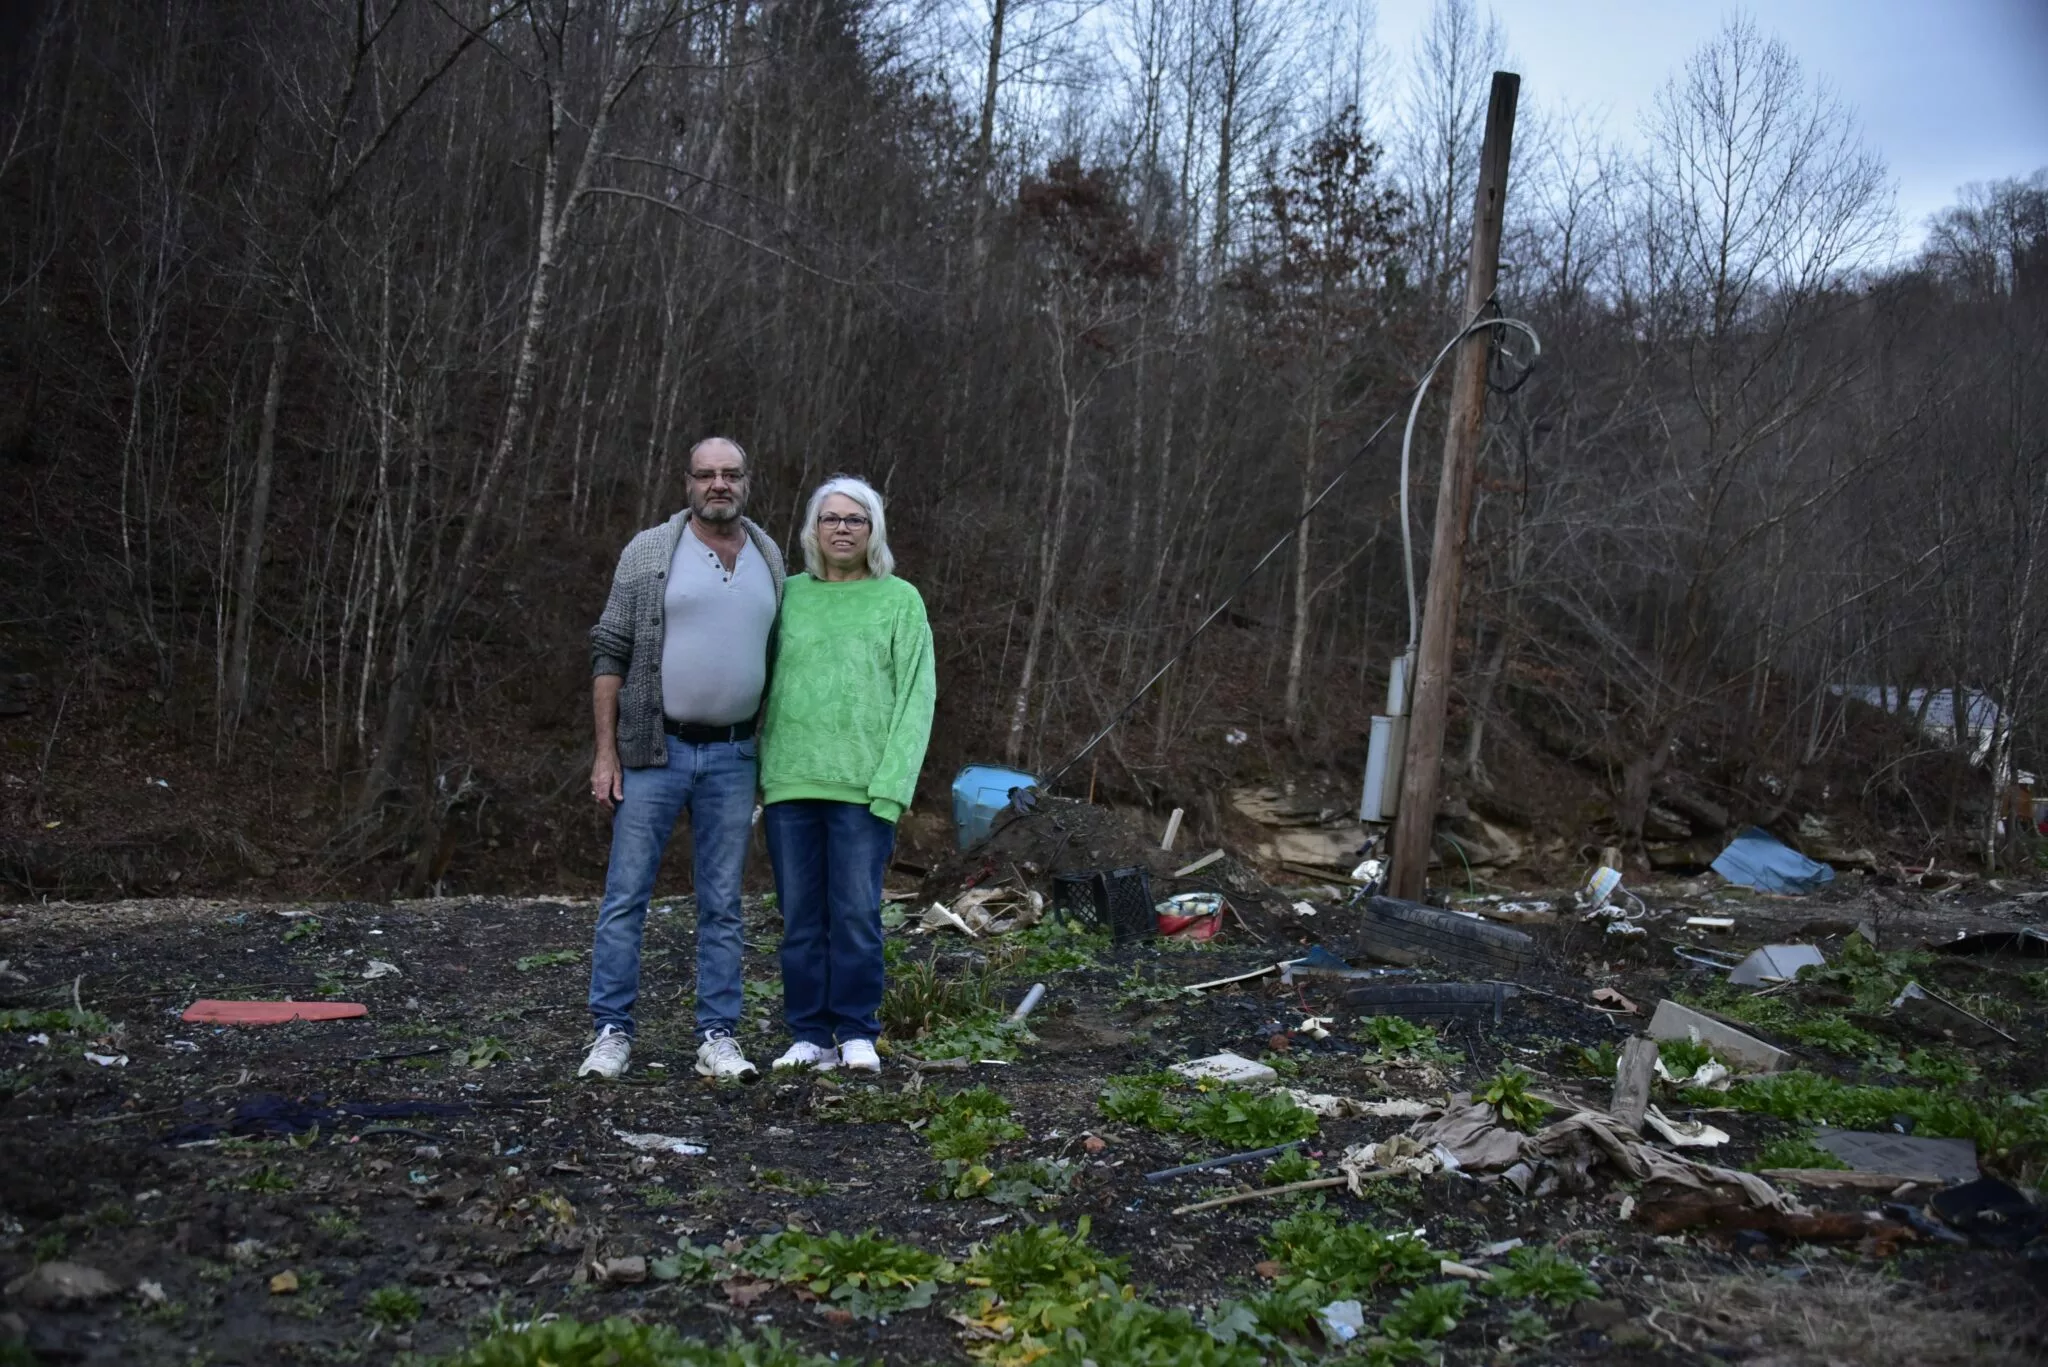 Invasive and Incomplete: How flood cleanup left eastern Kentucky feeling violated and vulnerable